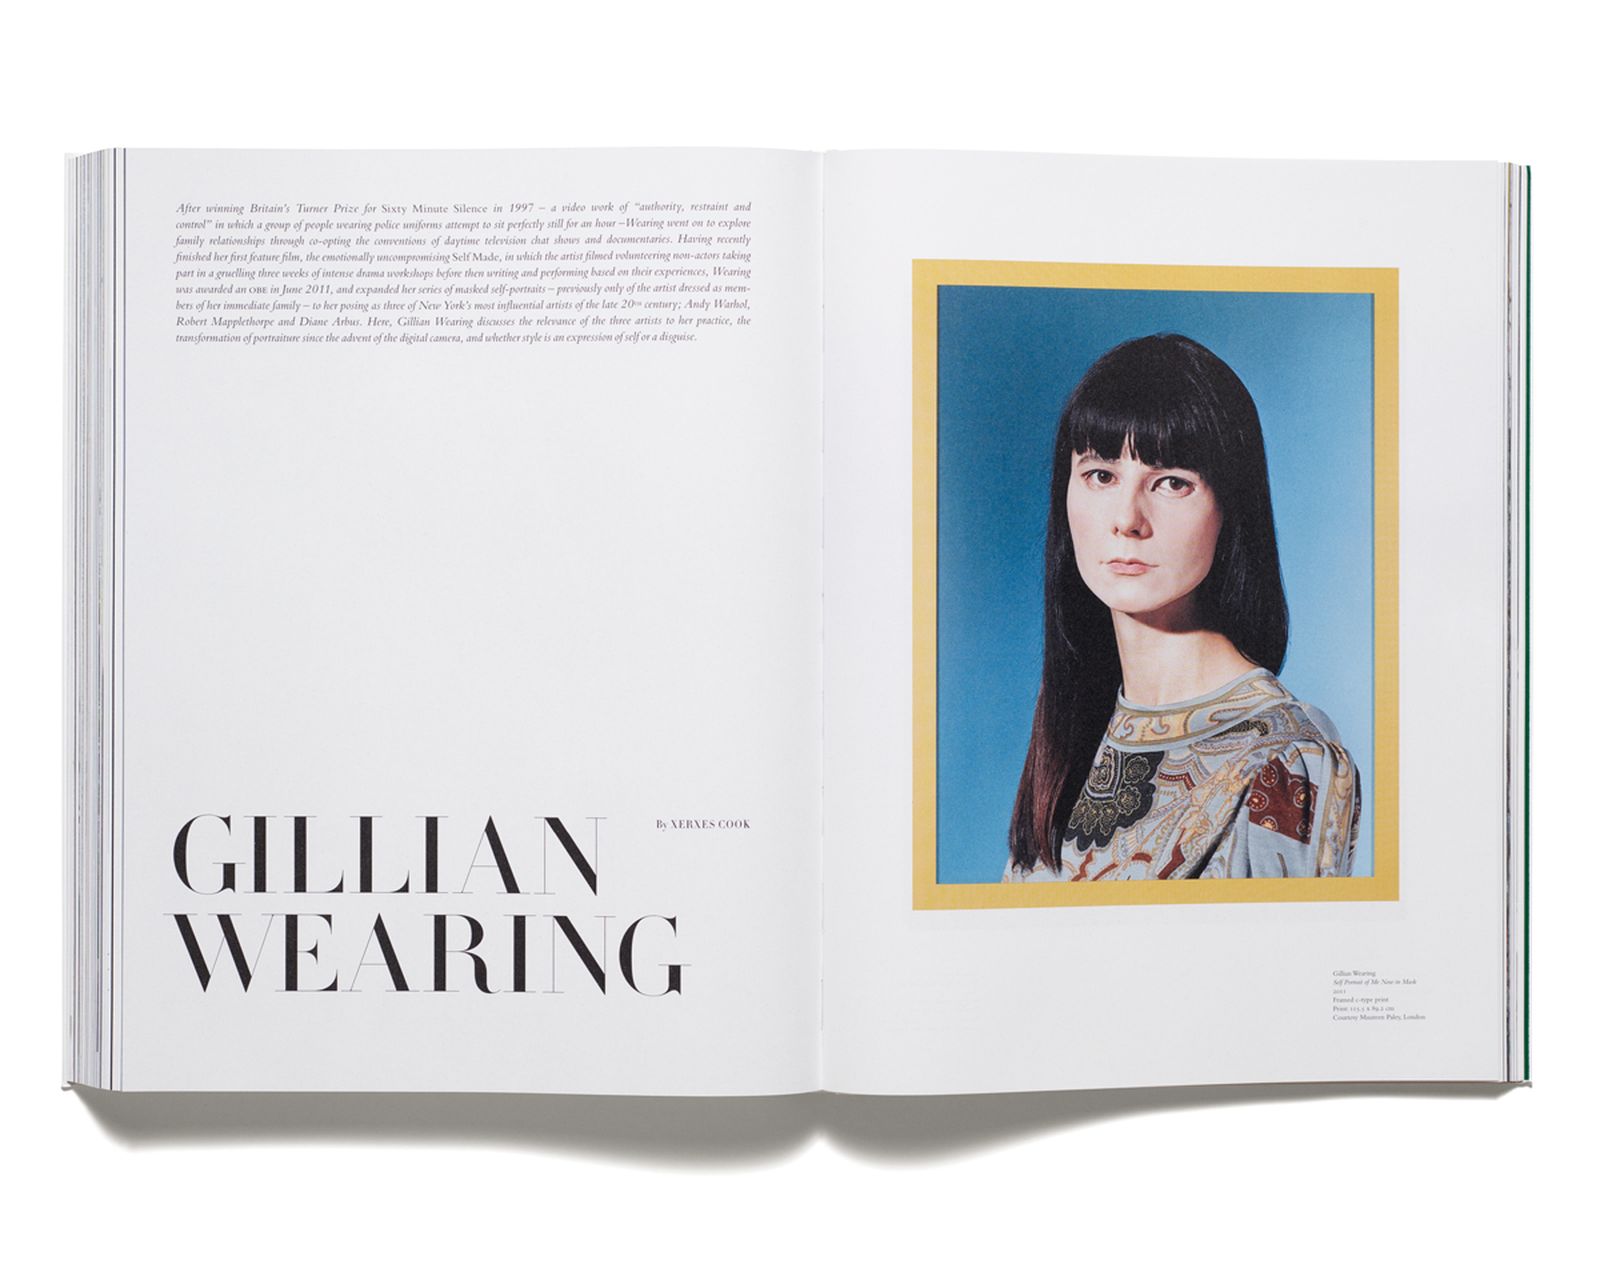 GILLIAN WEARING - Gillian Wearing interviewed by Xerxes Cook for 'Acne Paper'
issue 13, 2012. Art work by Gillian Wearing.